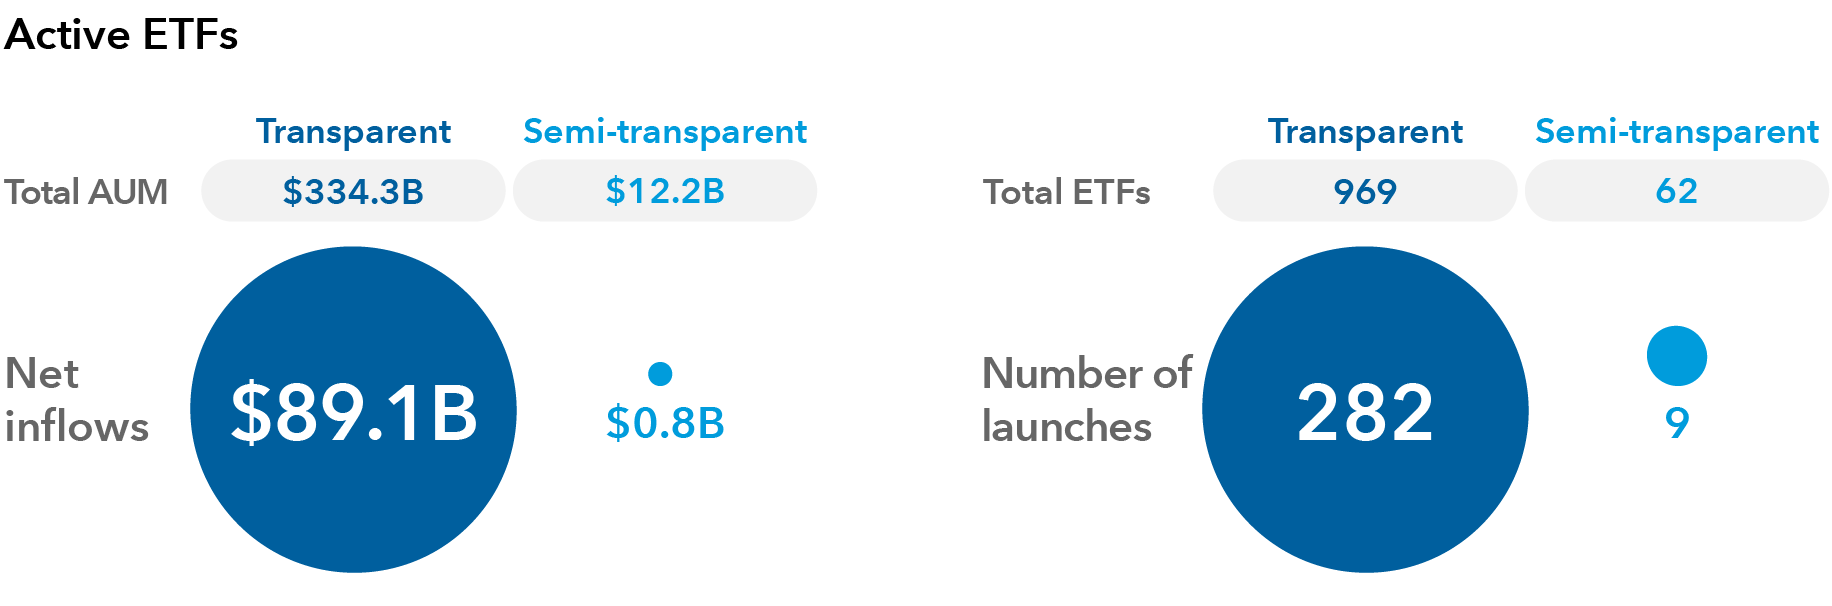 A graphic comparing 2022 data for transparent and semi-transparent active ETFs. Transparent ETFs saw net inflows of $89.1 billion for a total AUM of $334.3 billion. Semi-transparent ETFs saw net inflows of $0.8 billion for a total AUM of $12.2 billion. There were 282 new transparent ETF launches for a total of 969, and 9 new semi-transparent ETF launches for a total of 62.